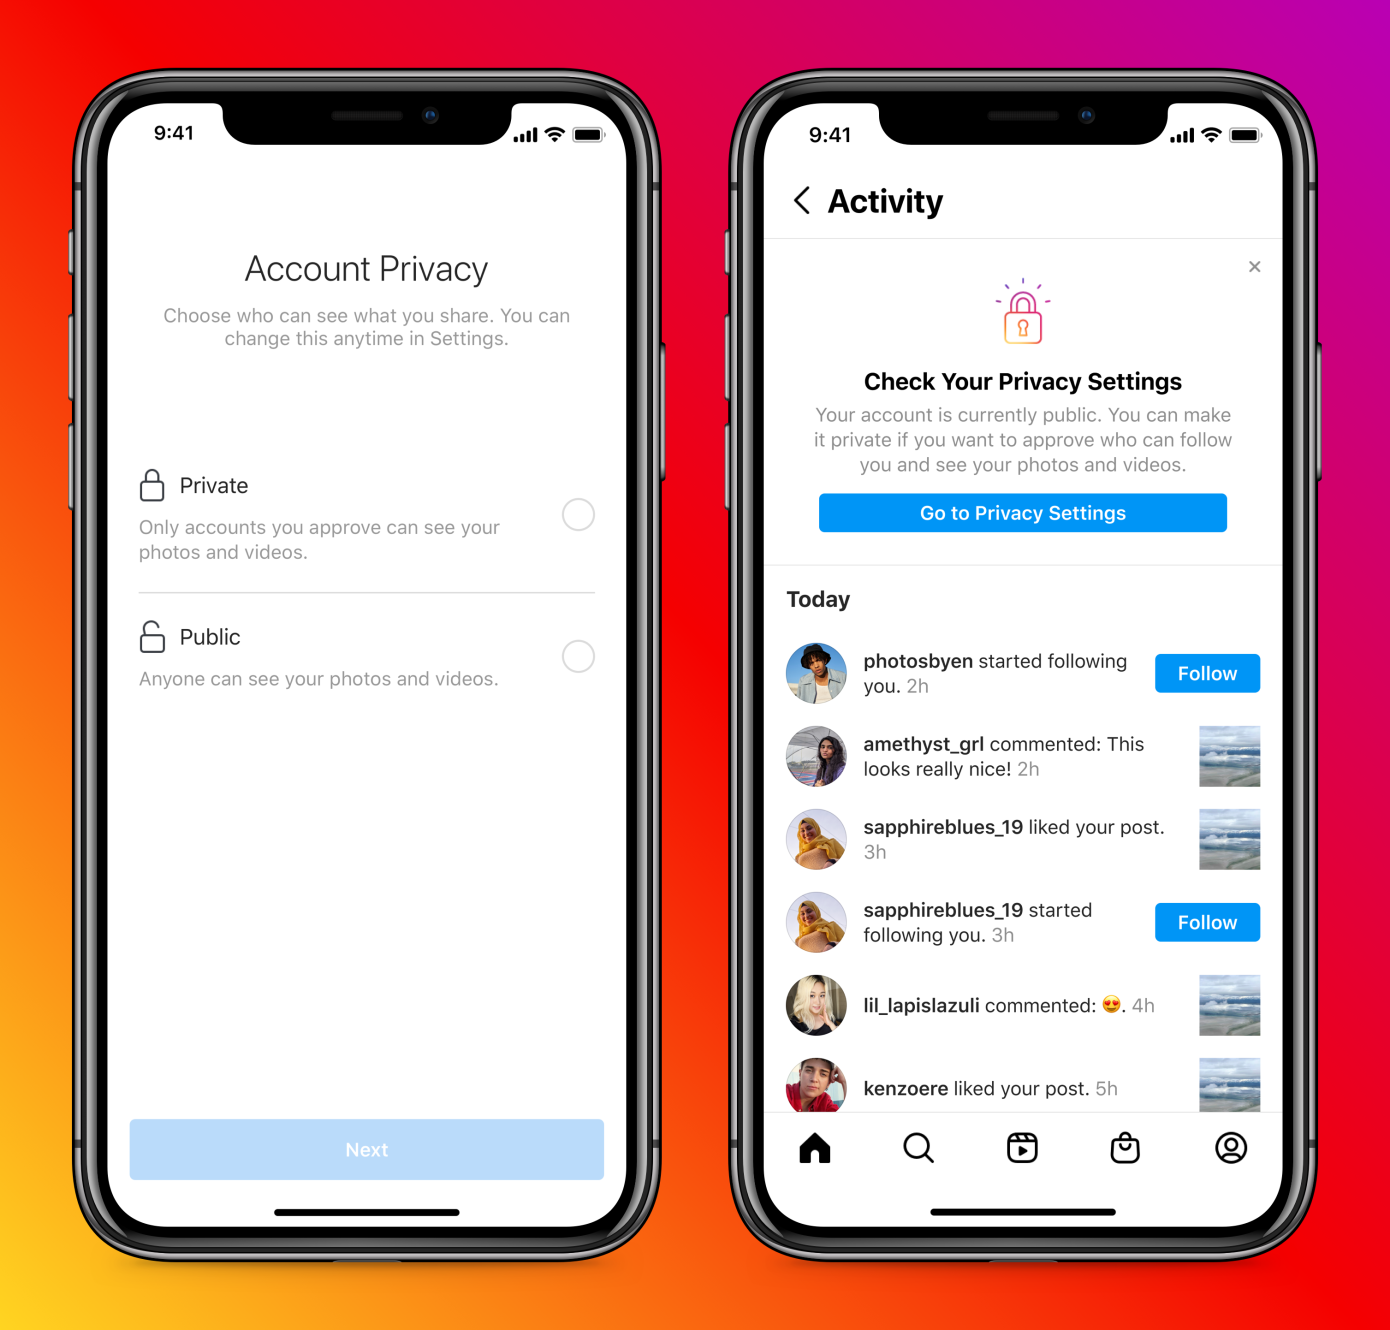 Instagram adds safety tools for teens as competition with TikTok increases